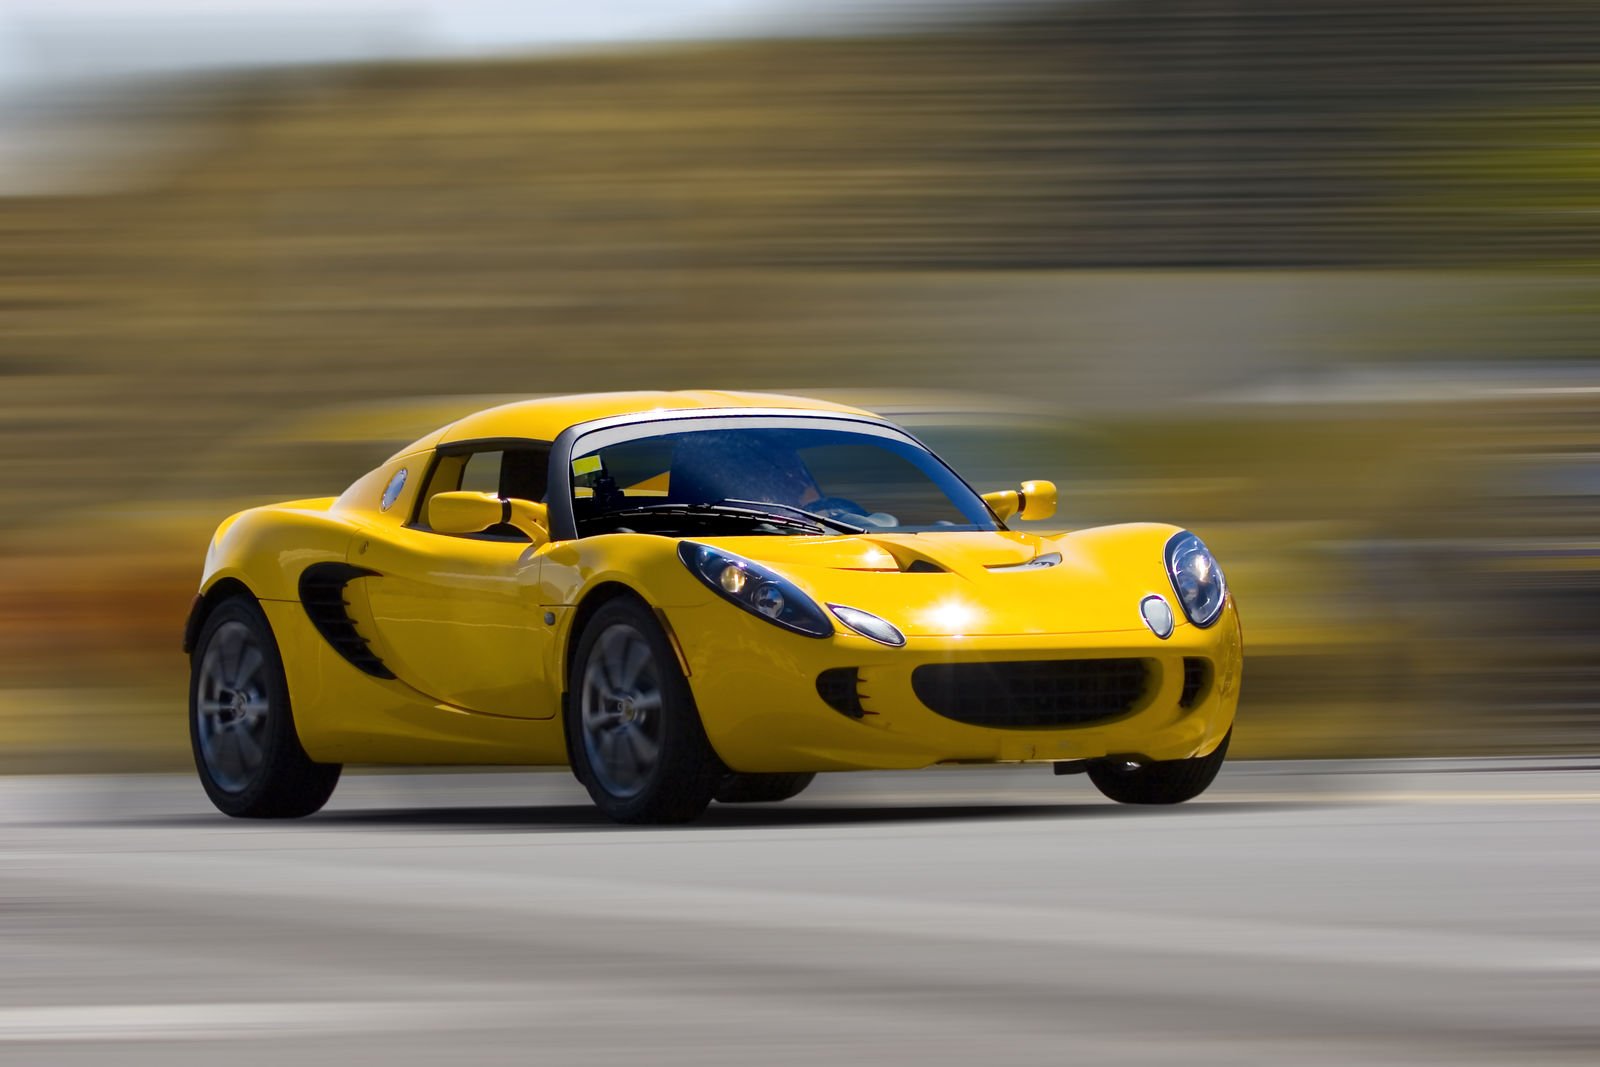 Sports Car Insurance: What Cars are Considered Sports Cars for Insurance?